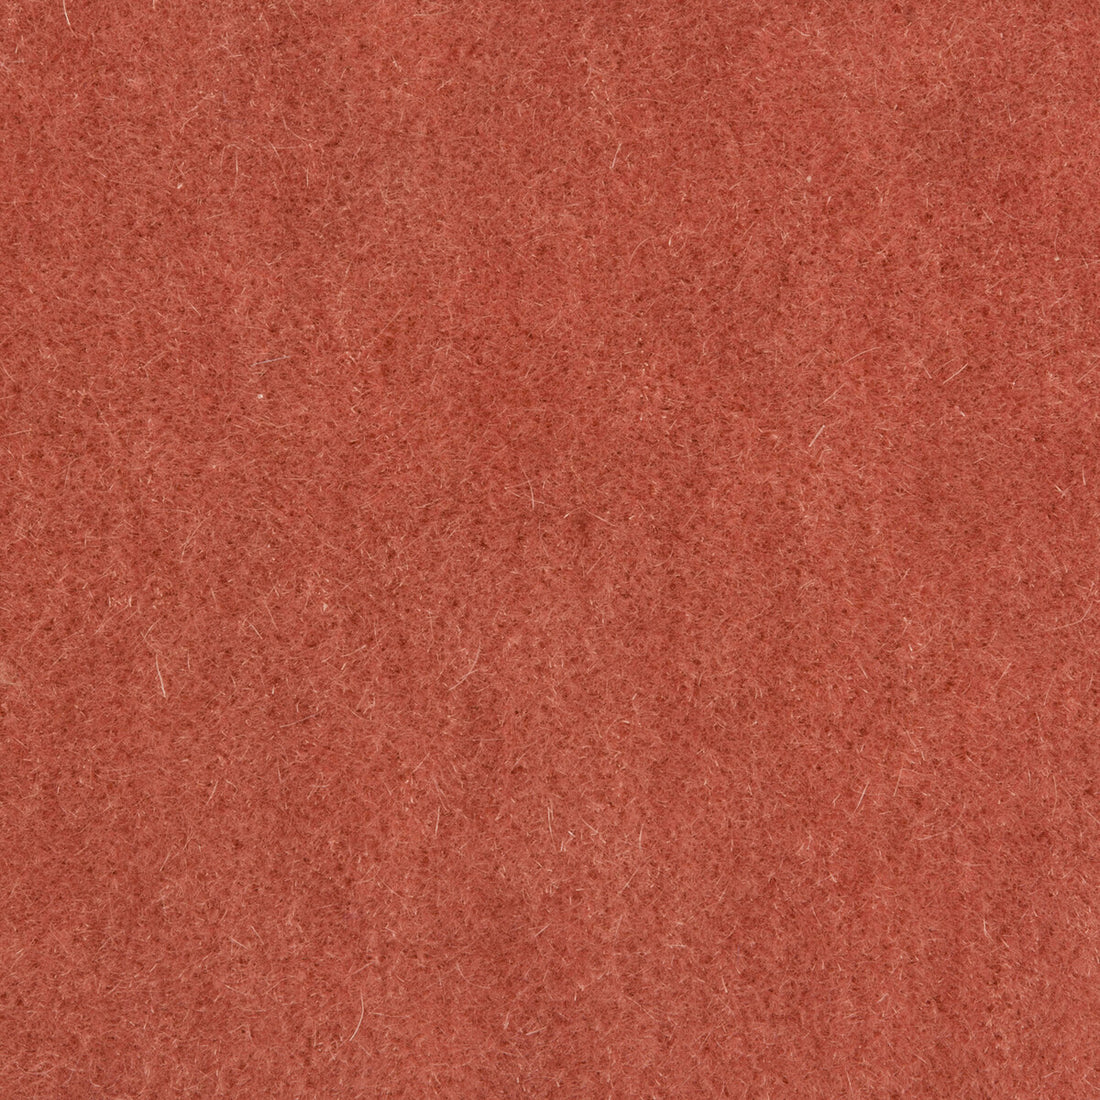 Bachelor Mohair fabric in blush color - pattern 8014101.17.0 - by Brunschwig &amp; Fils